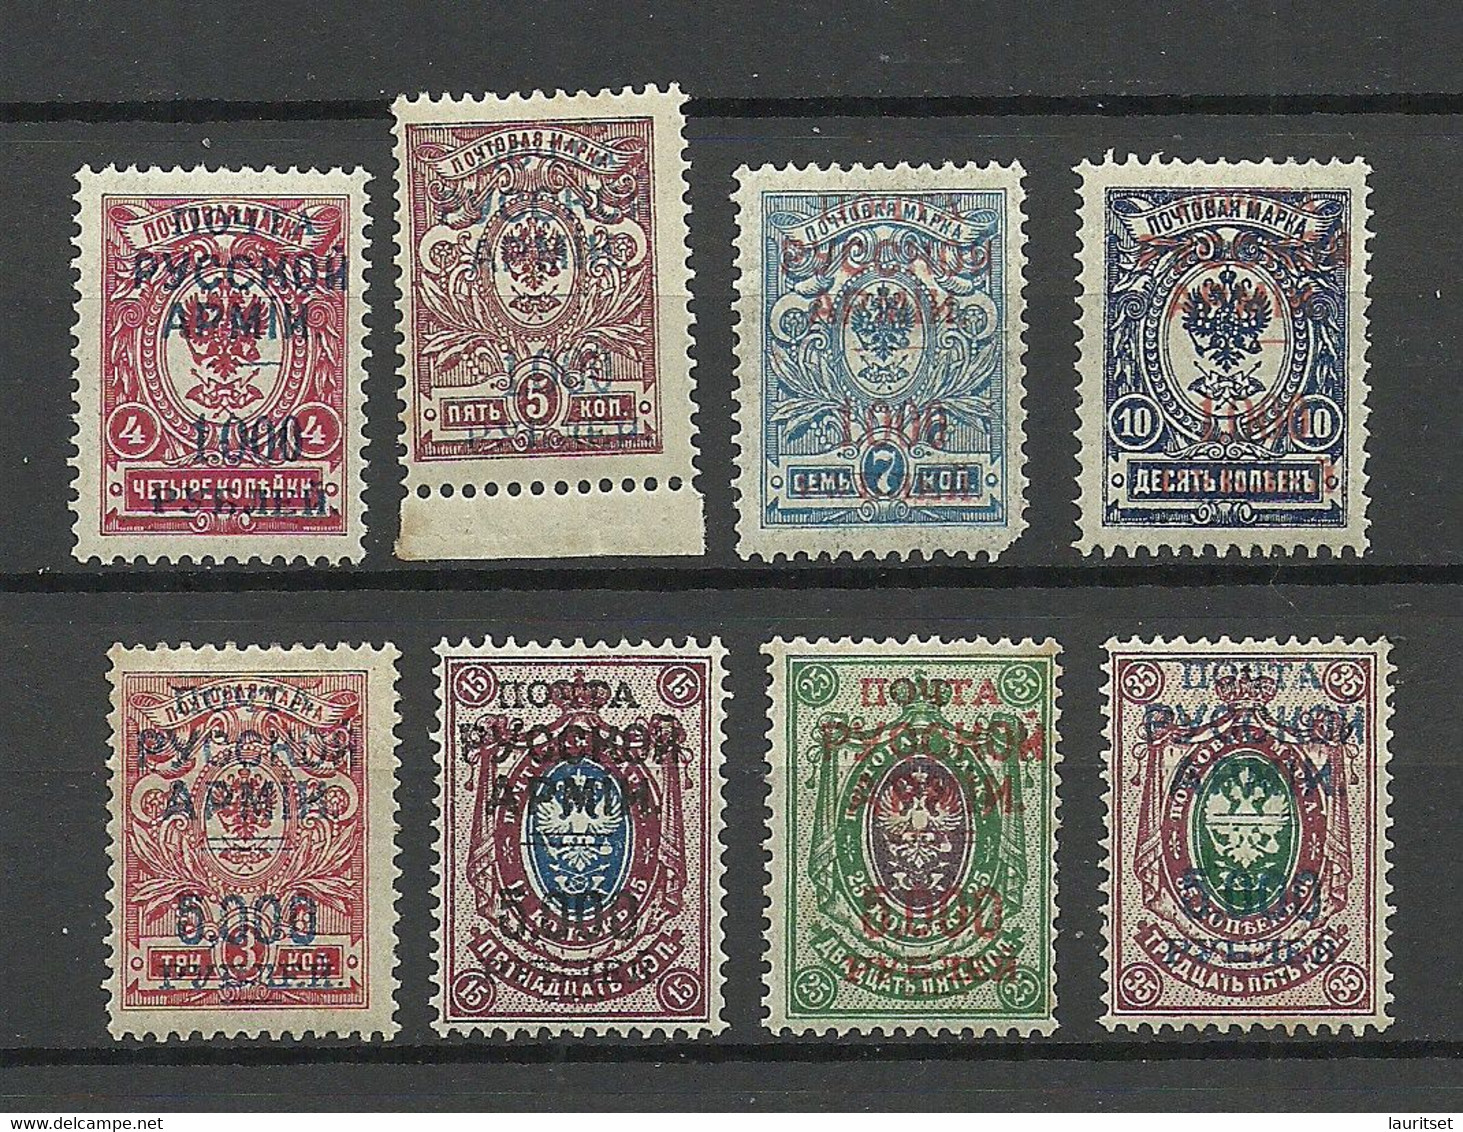 RUSSLAND RUSSIA 1920 Civil War Wrangel Army Camp Post At Gallipoli OPT, 8 Stamps * Some Are Signed - Wrangel Army